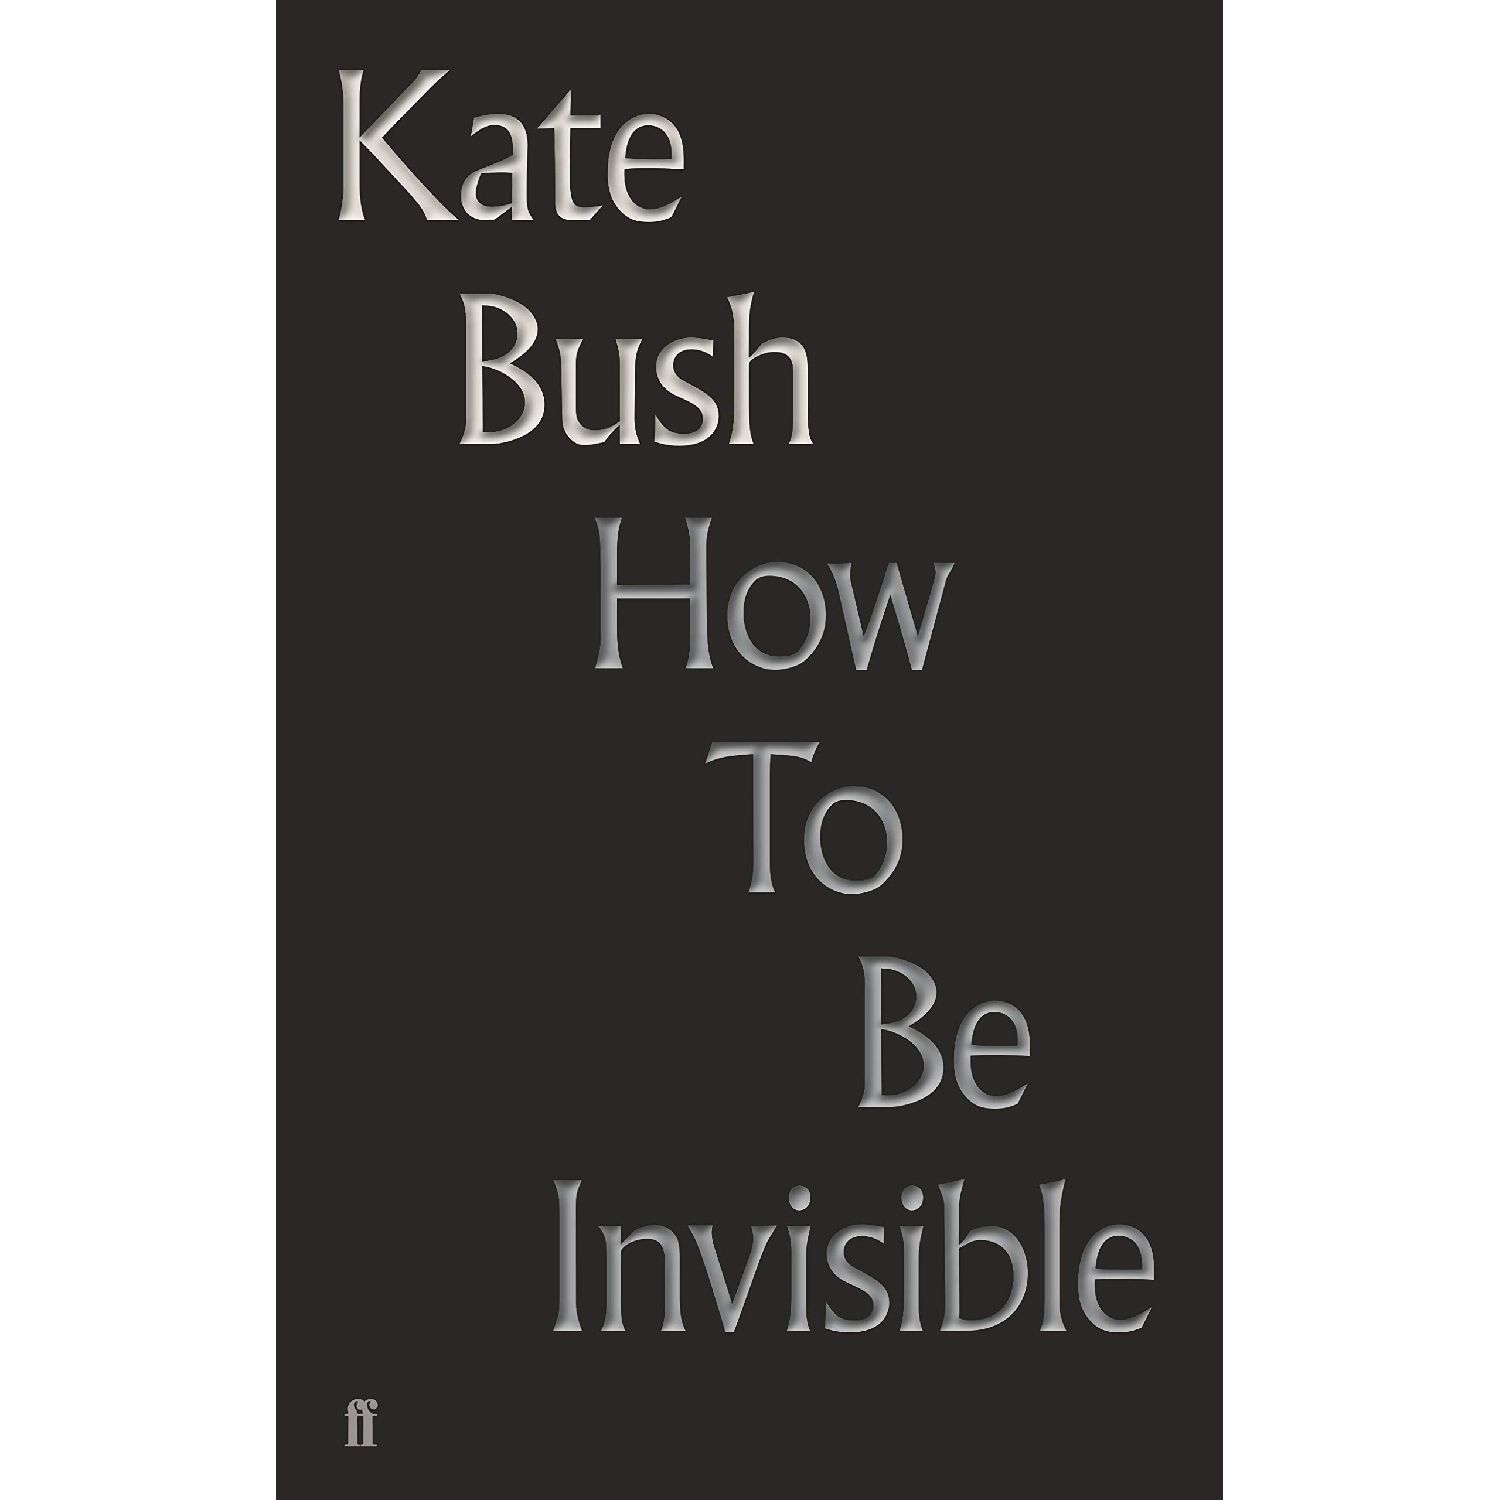 KATE BUSH / ケイト・ブッシュ / HOW TO BE INVISIBLE (HARDCOVER BOOK)